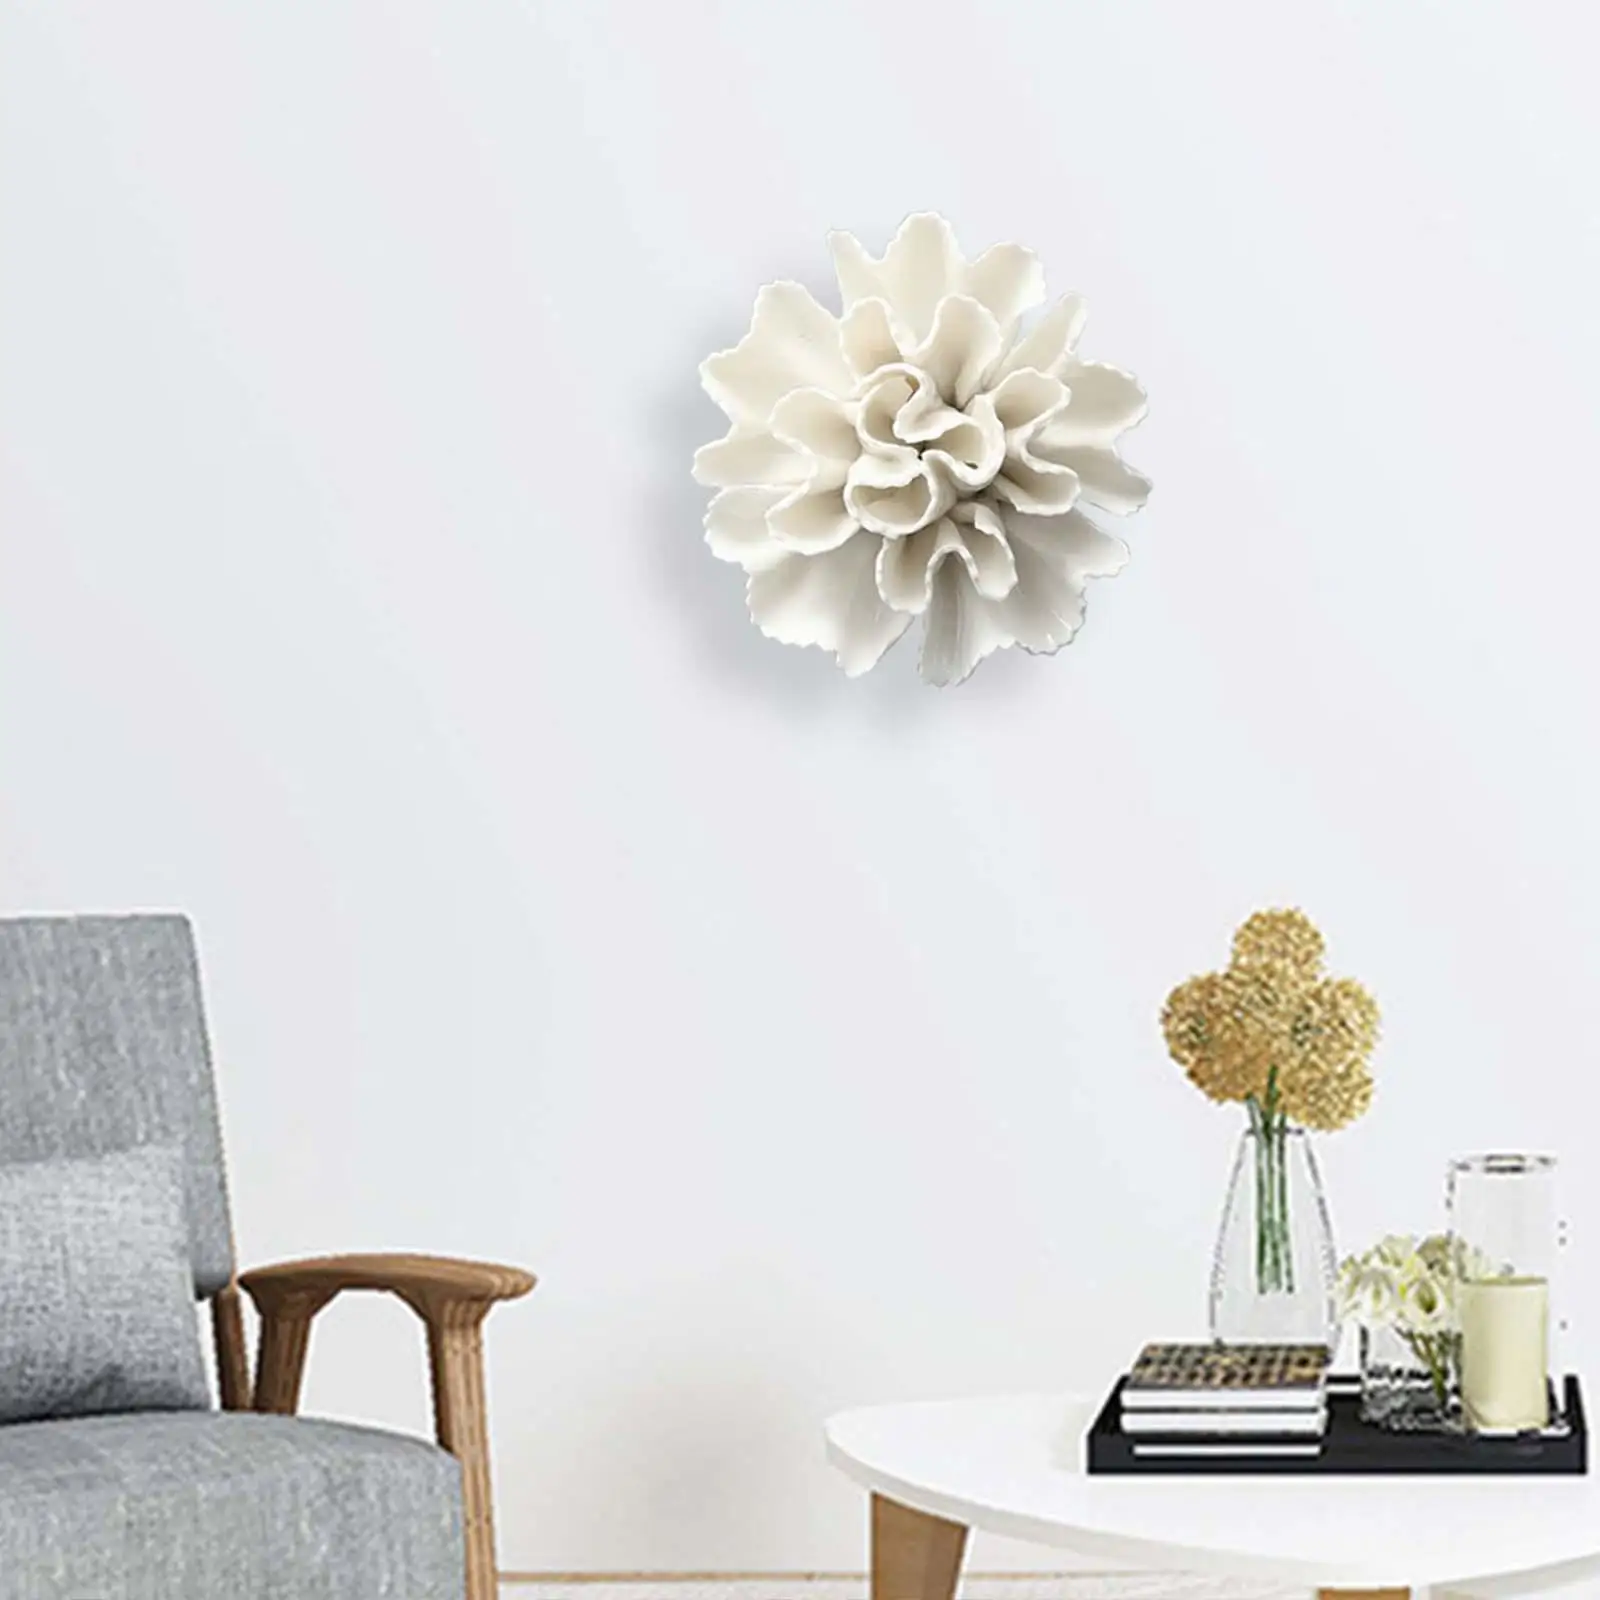 Hanging Wall 3D Ceramic Flower Wall Decor Artificial Flower for Office Home